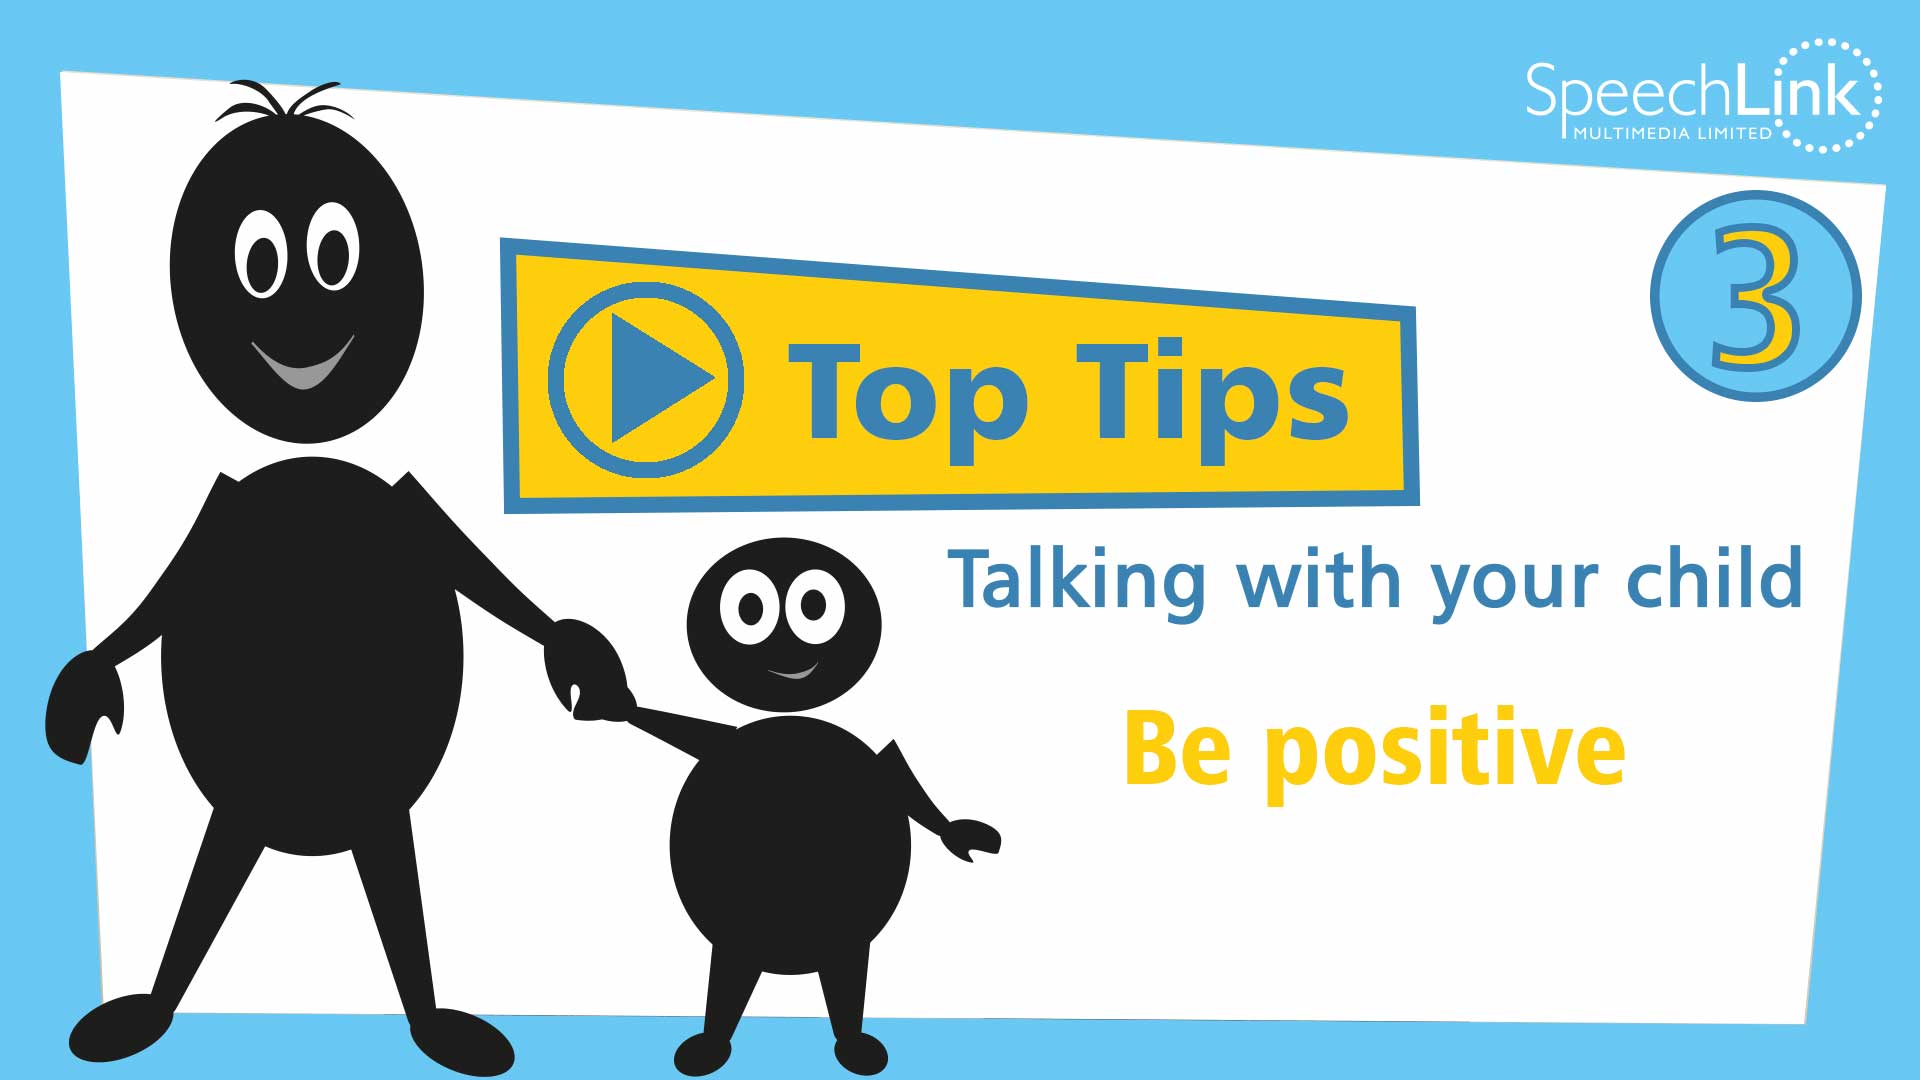 Top Tip 3 - Be positive